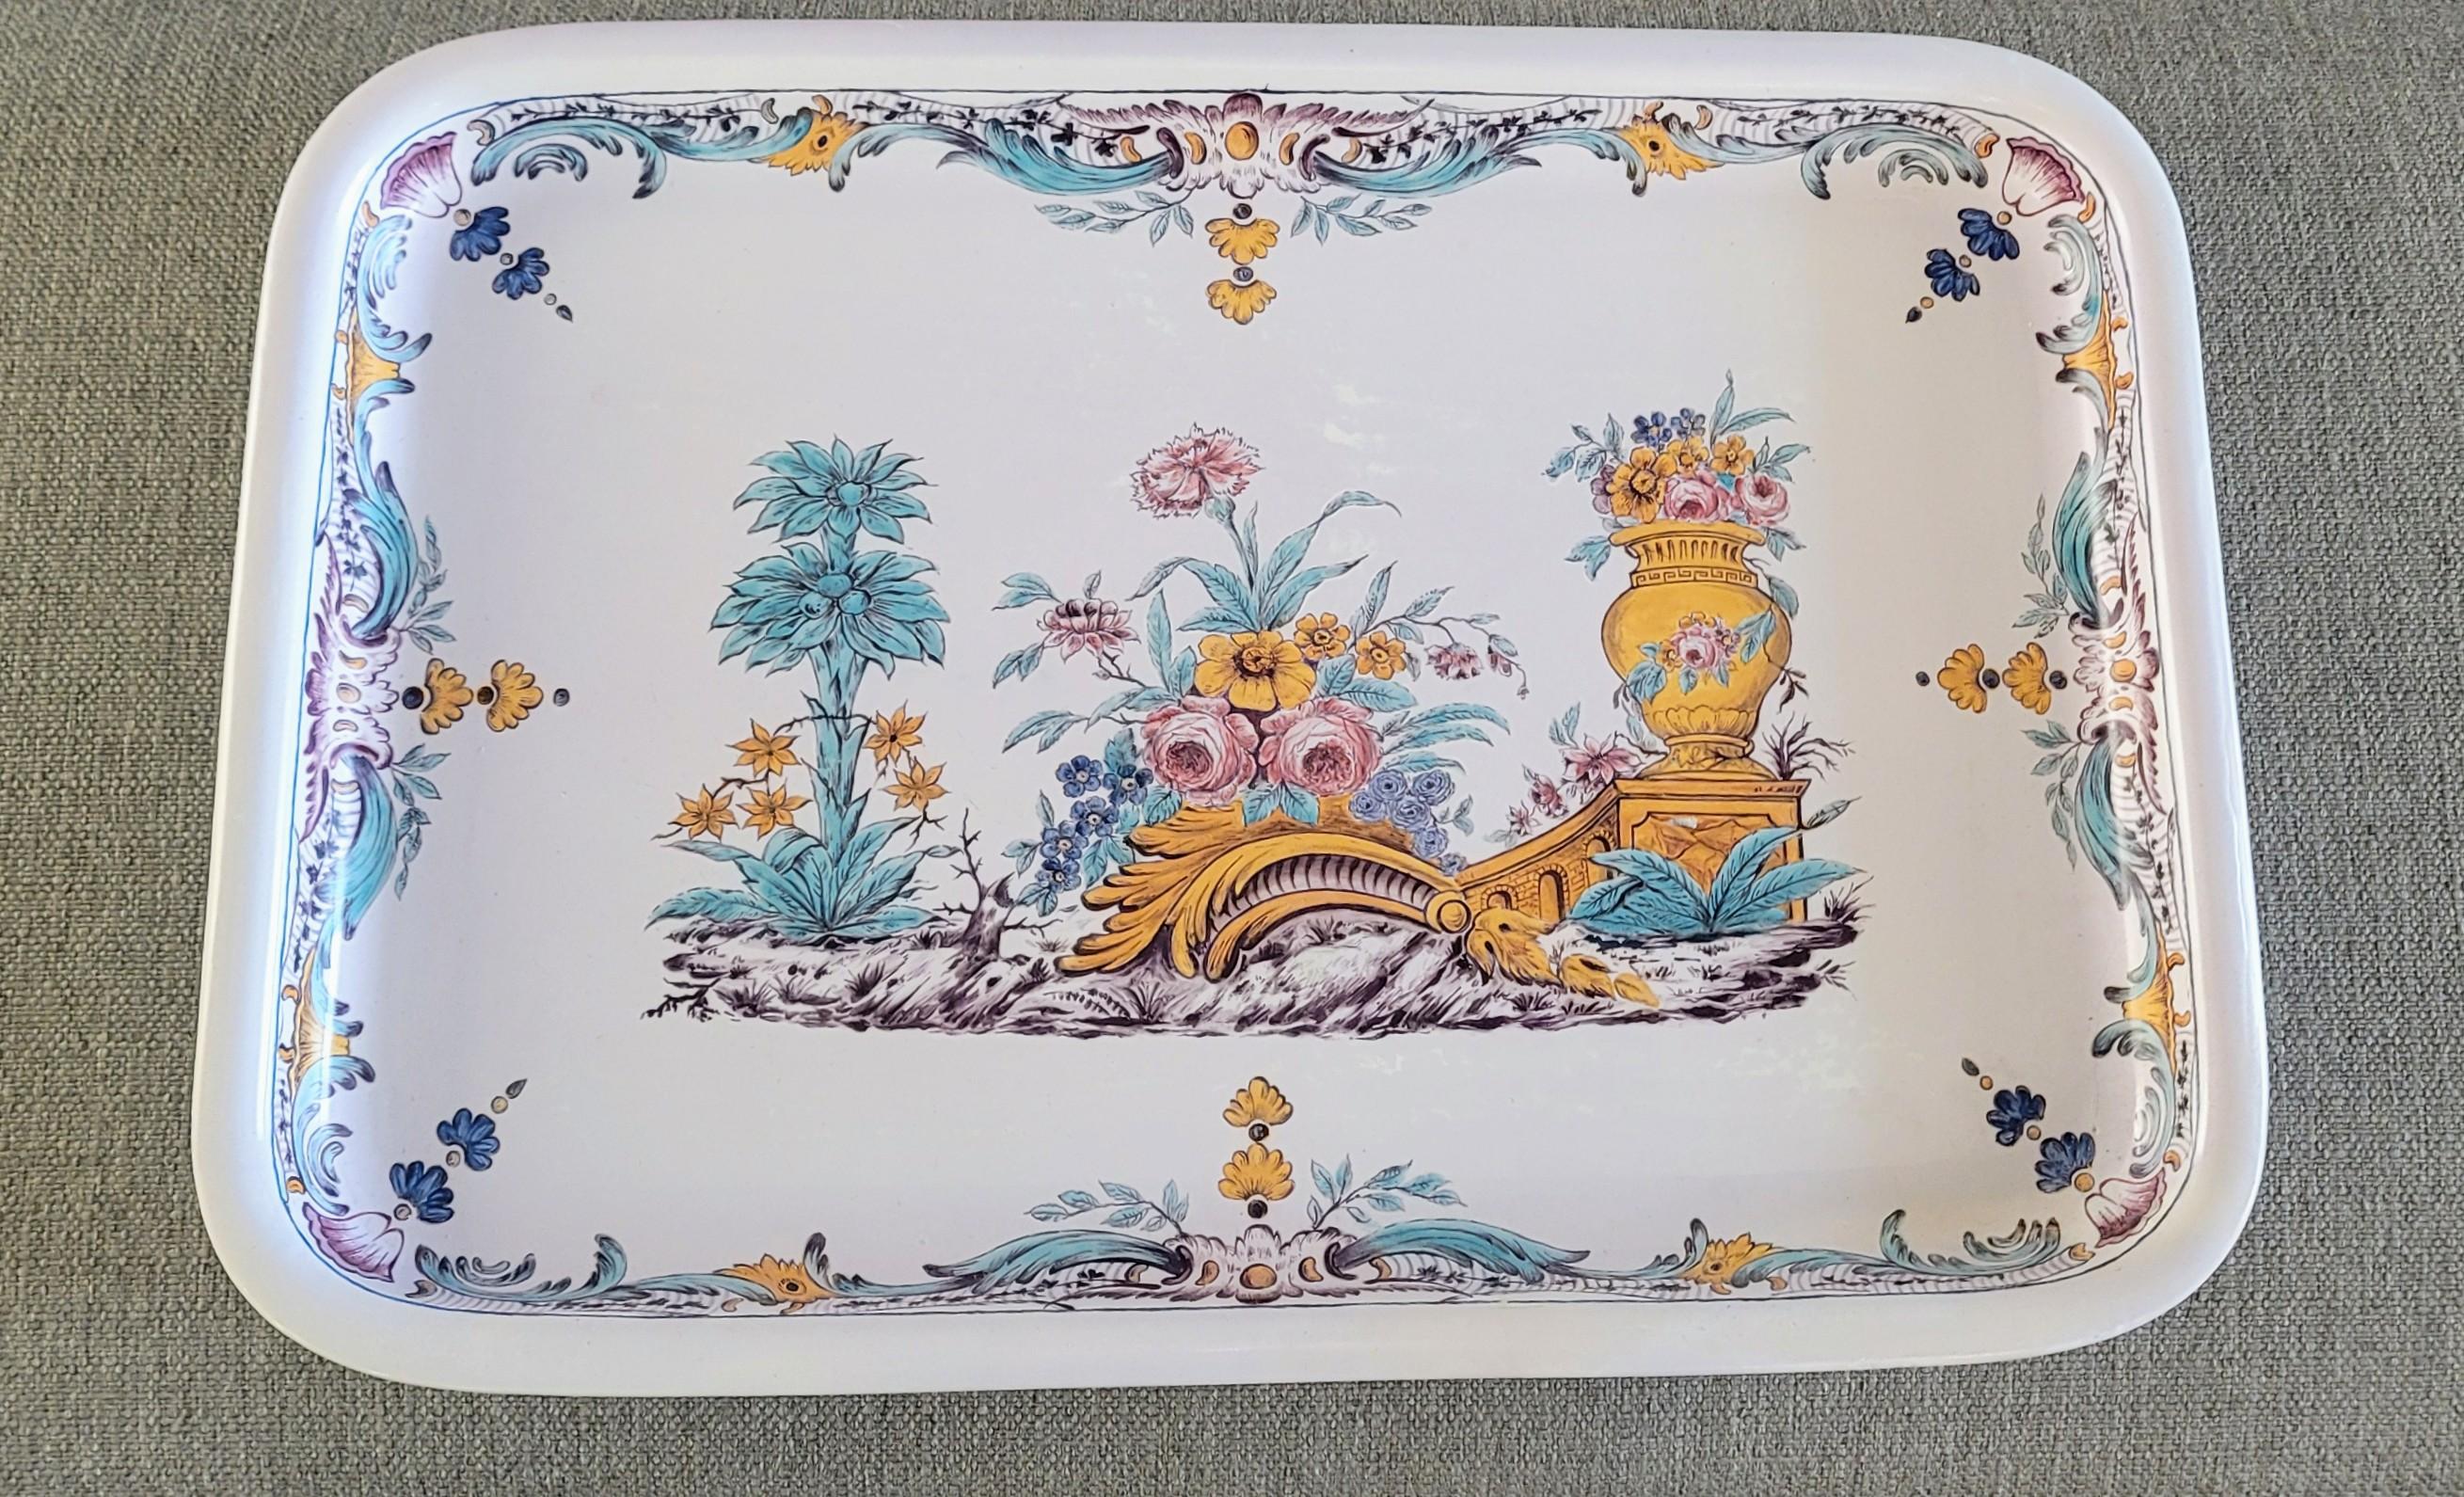 A rare monumental Swedish Rörstrand porcelain (established in 1726) heavy high quality decorative serving tray.

Exquisitely hand-crafted in Sweden in the early 20th century, the dished and molded palatial rectangular shaped tray features